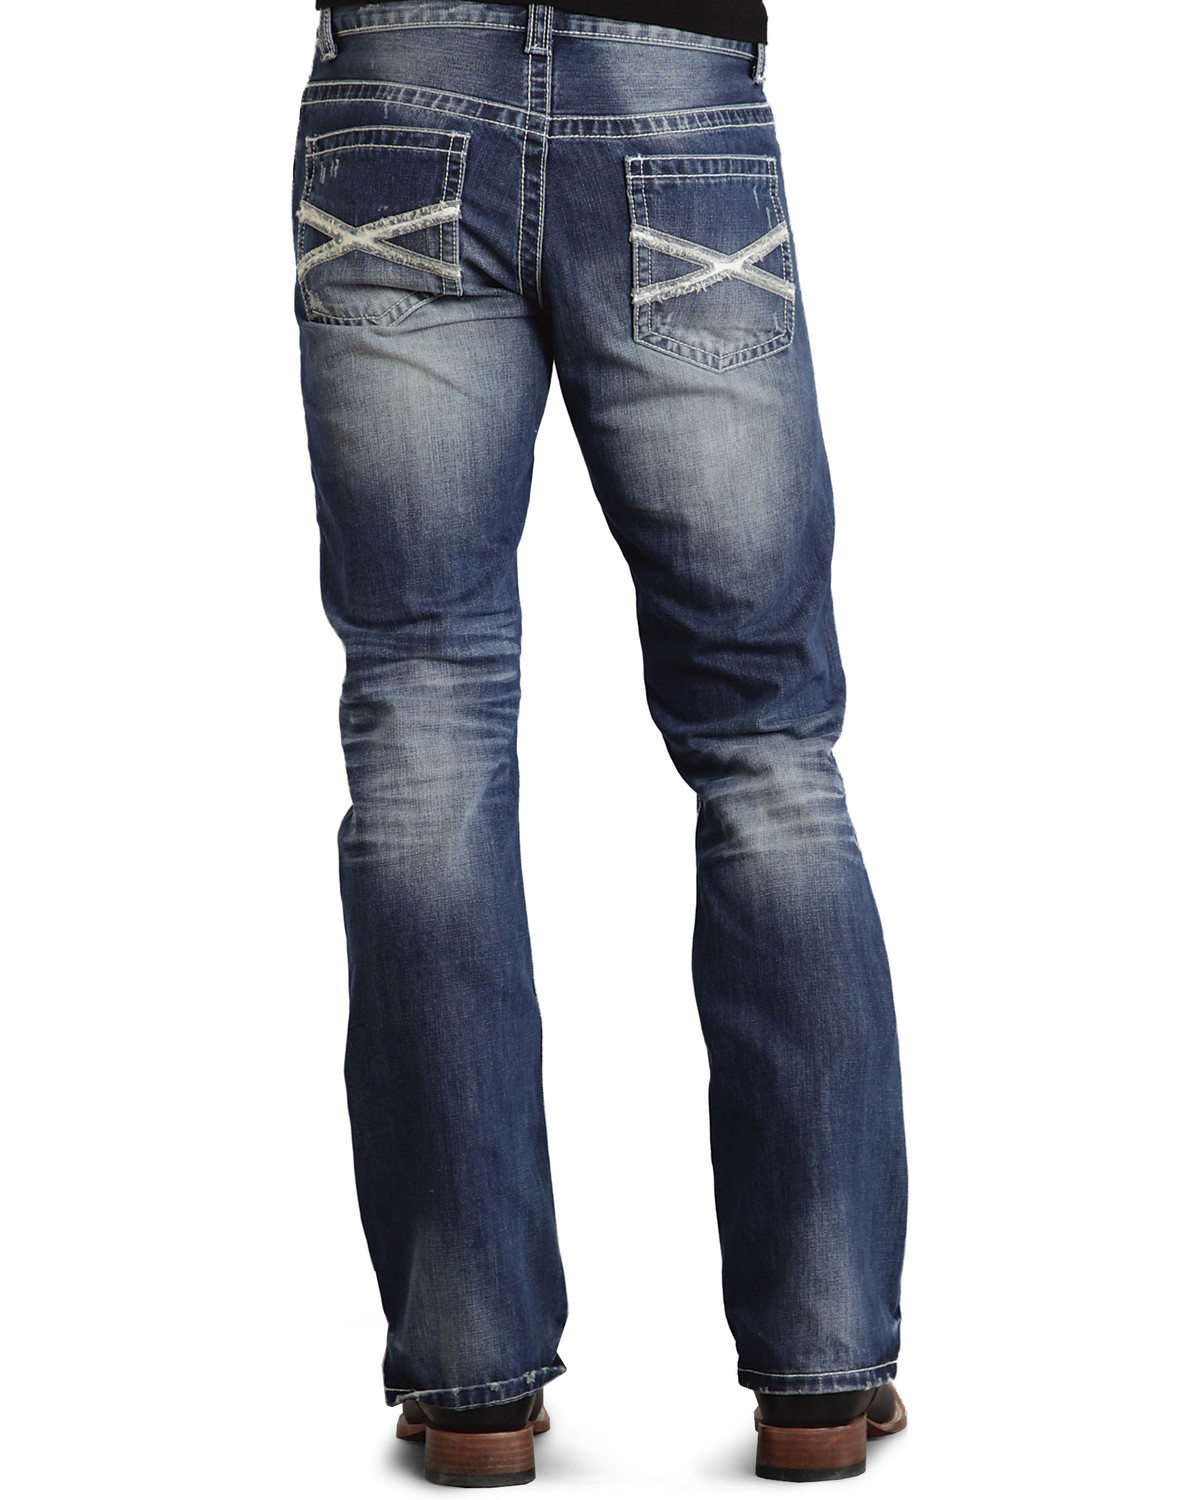 Stetson Rock Fit Bold X Stitched Jeans - Big & Tall - Country Outfitter